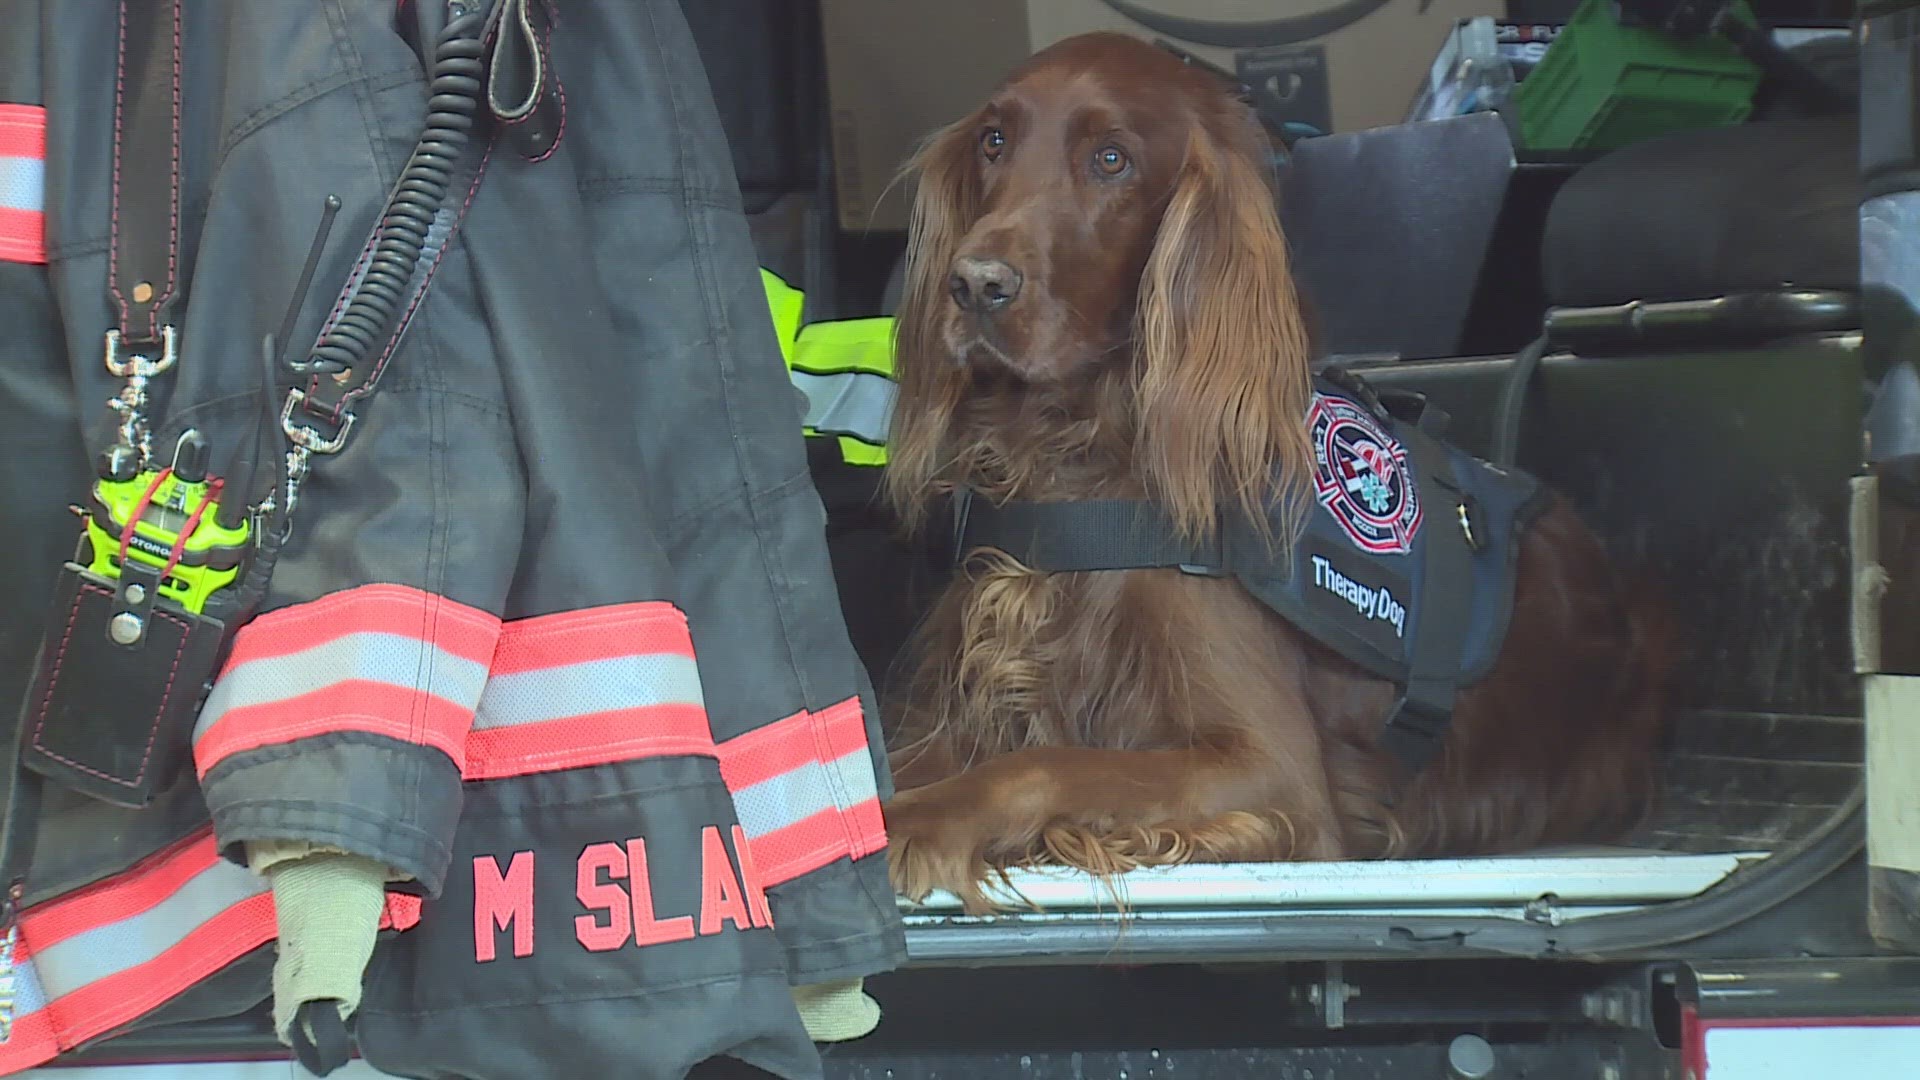 "We’re really taking the stigma of mental health across the fire service and the dogs are a key component to break down those barriers,” said Captain Reid Norwood.